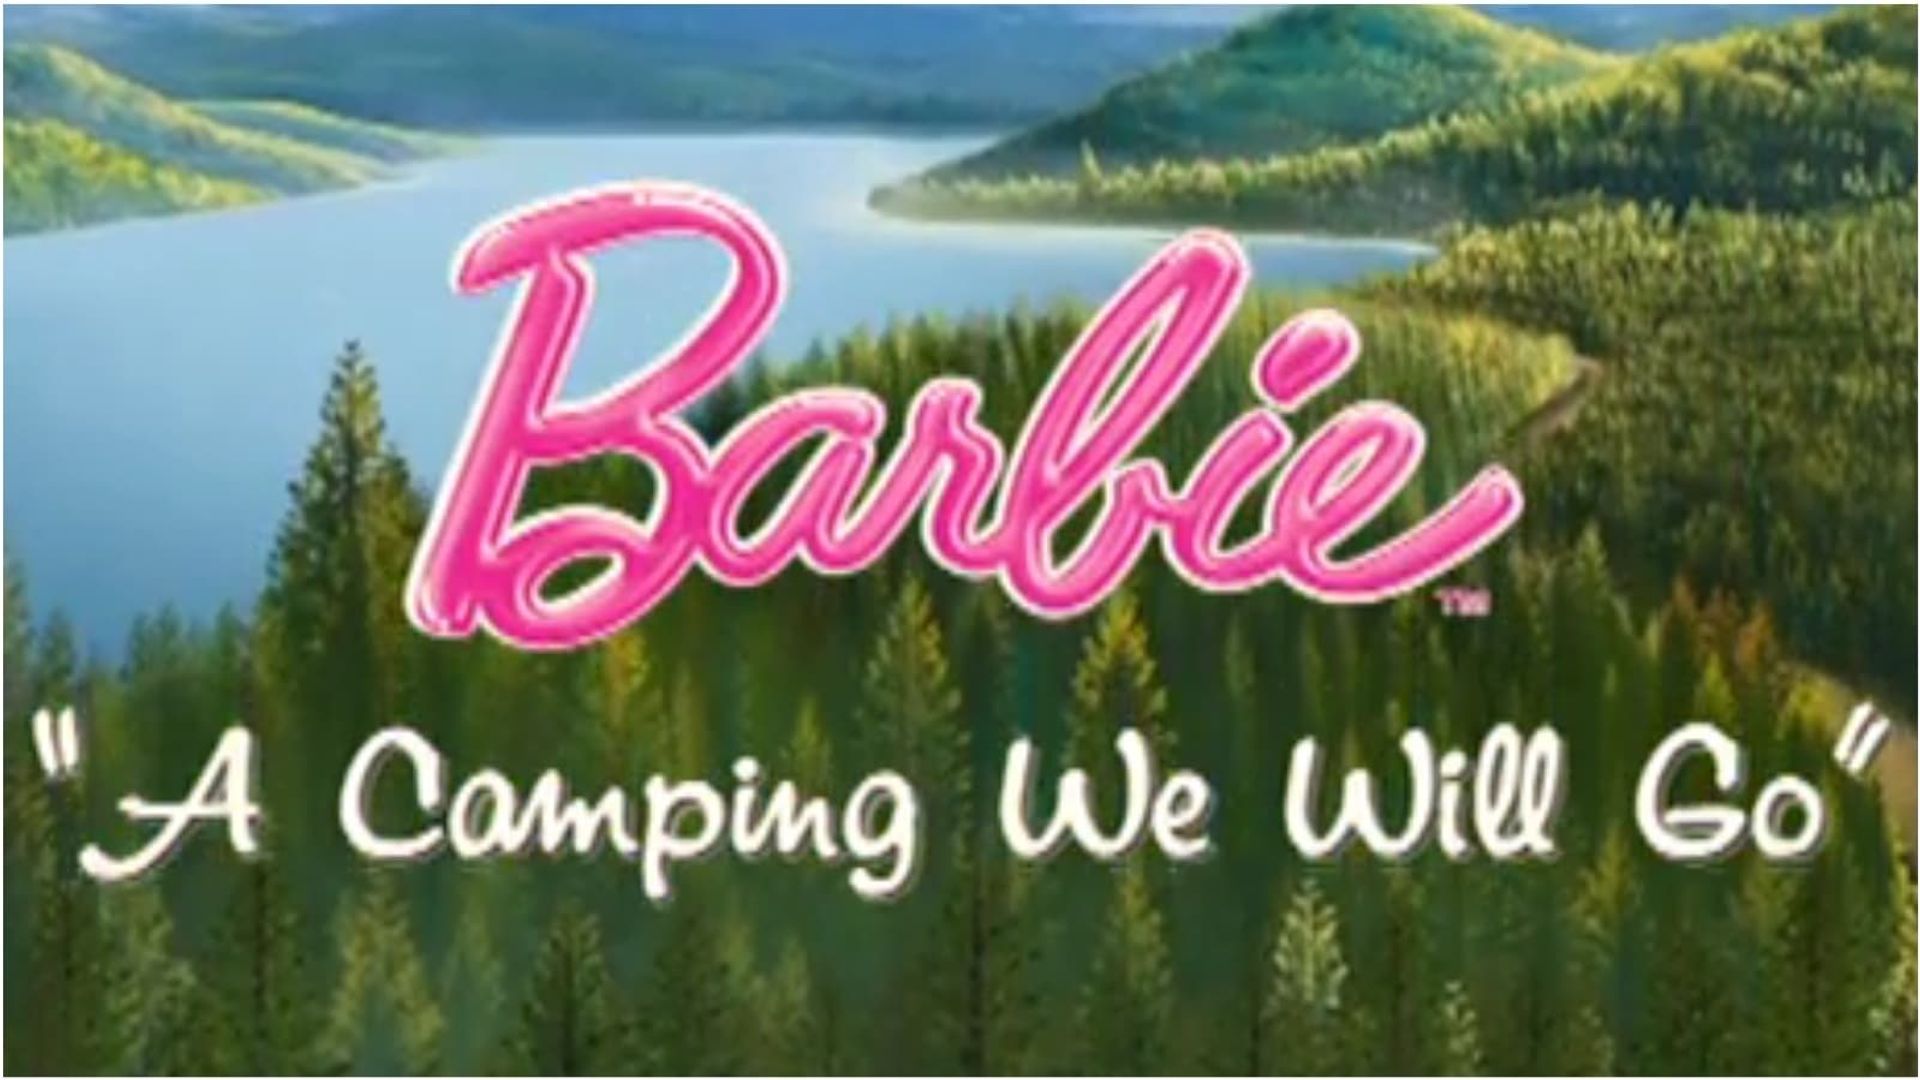 Barbie: A Camping We Will Go background